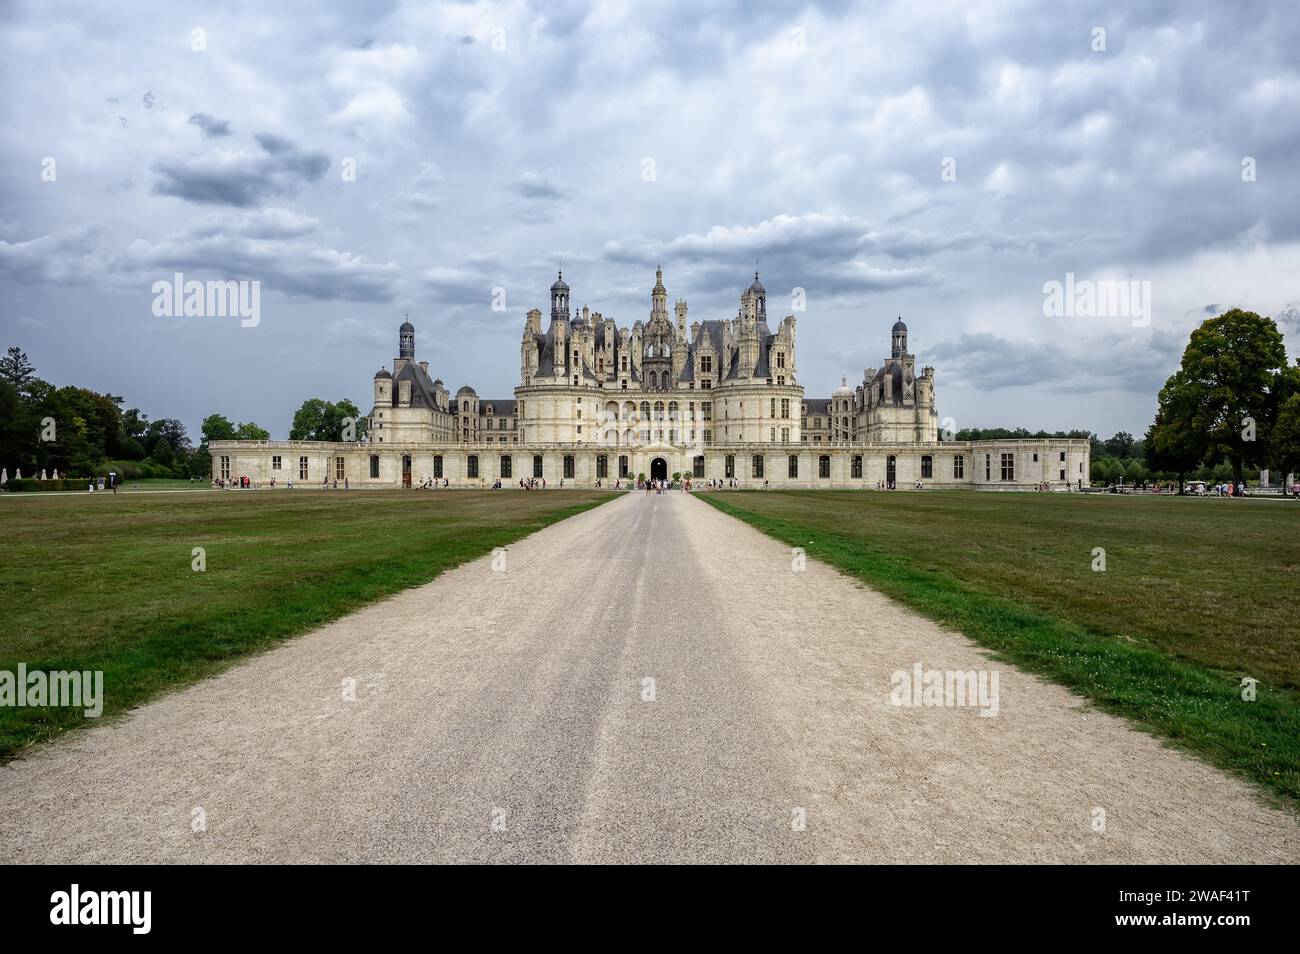 The Château de Chambord on a cloudy day. A castle with more than 400 rooms to visit with the family, in the Loire Valley, France. Stock Photo